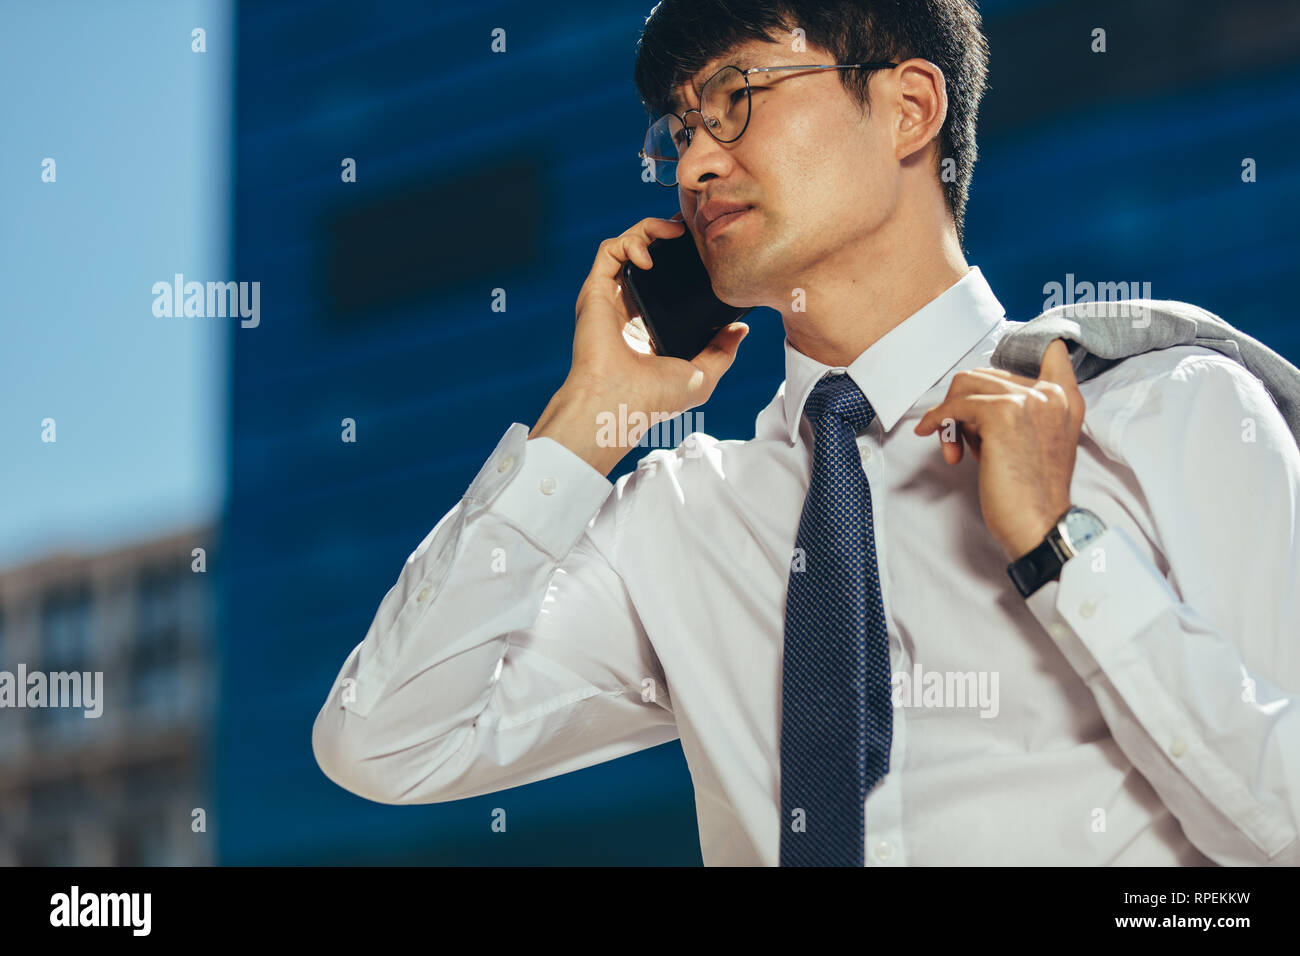 businessman talking on his mobile phone while walking outdoors. Korean man making a phone call against a office building in background. Stock Photo